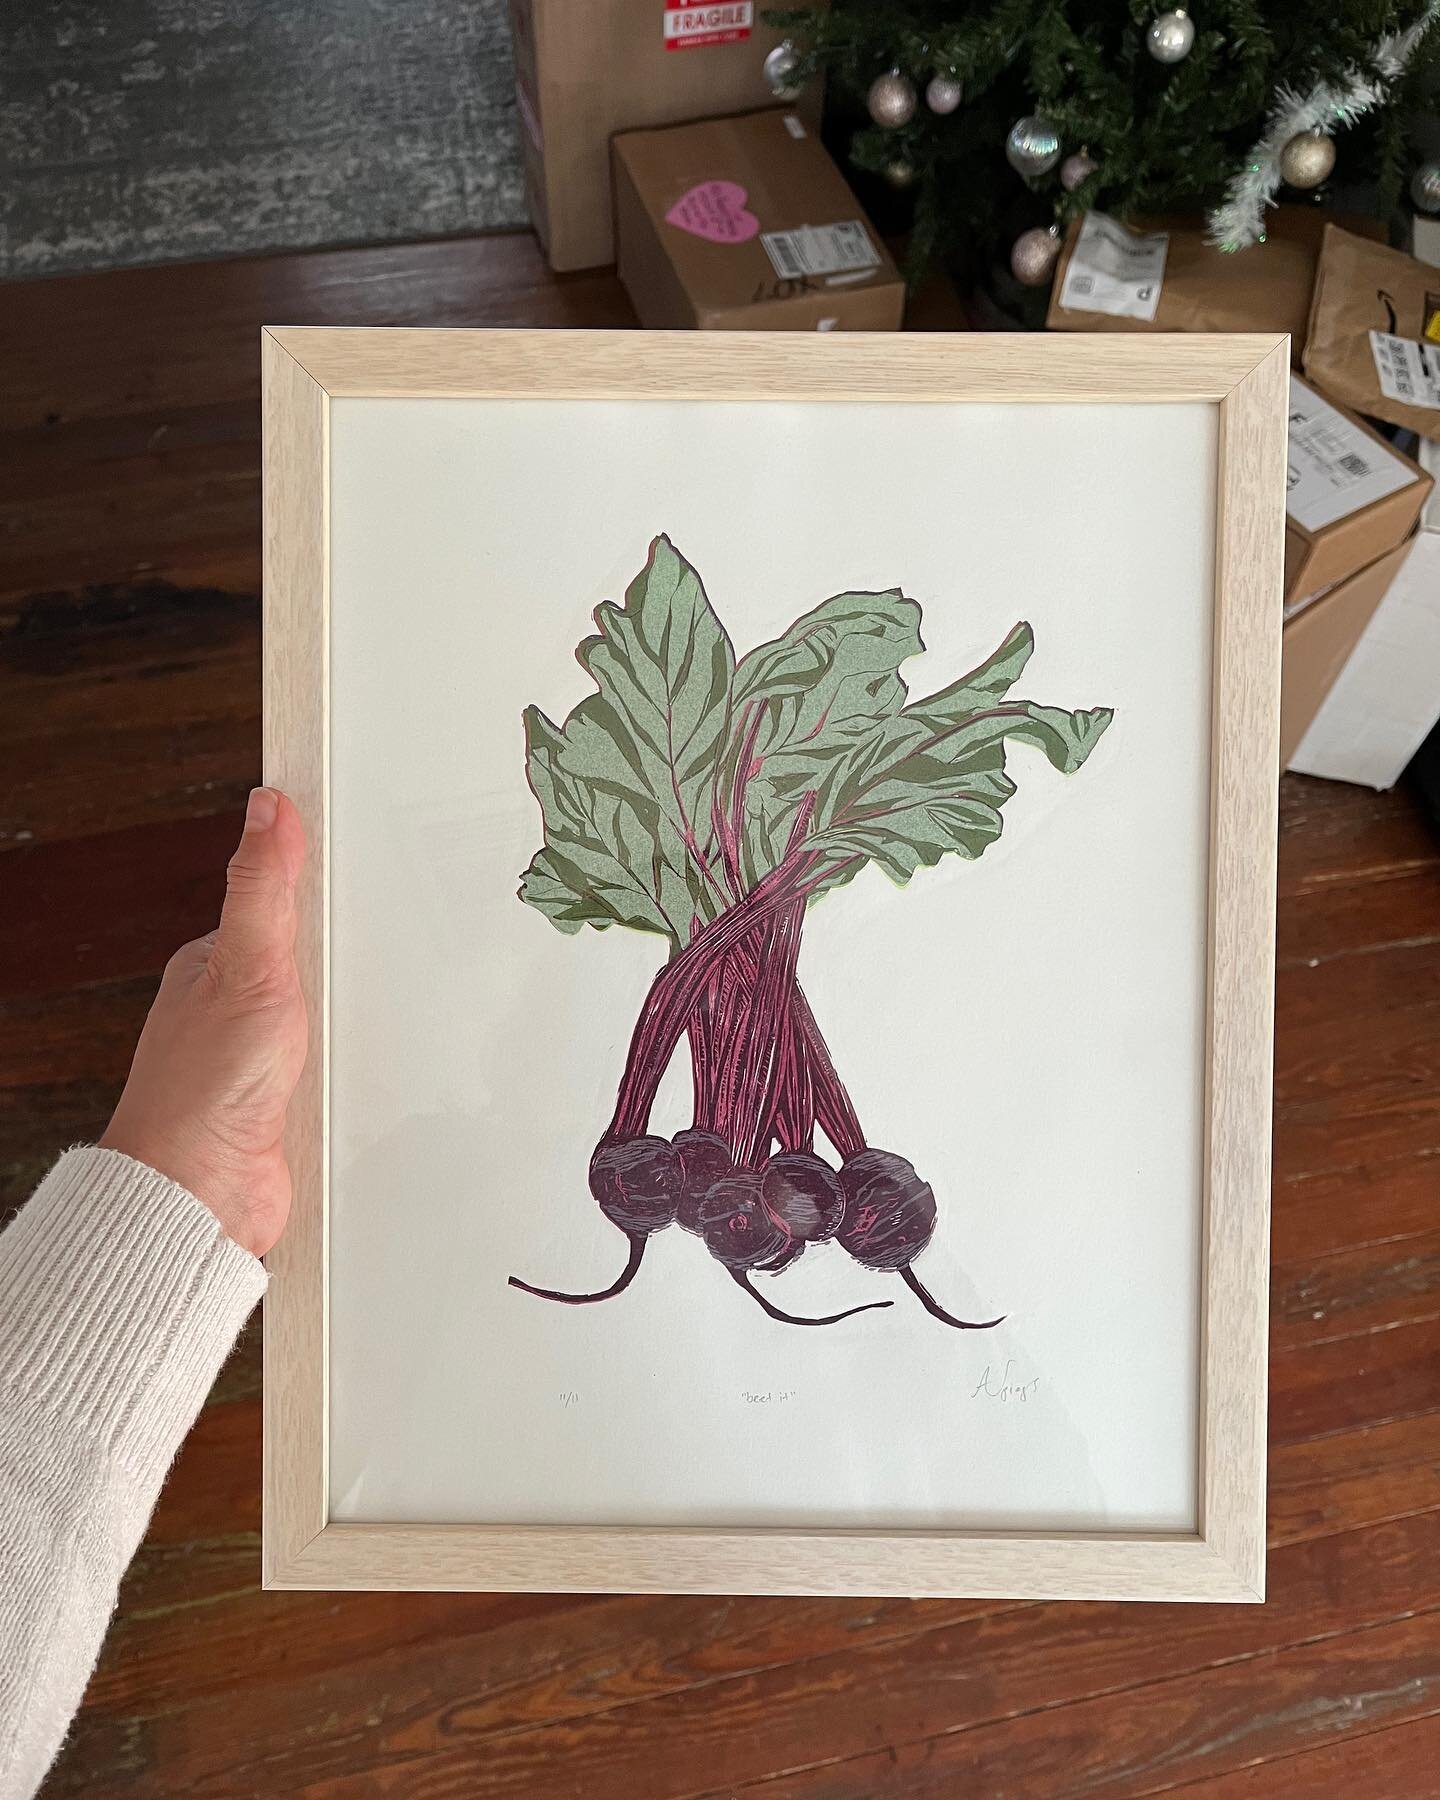 Original prints (hand carved, reduction lino cuts) still available in the online shop! A perfect gift for the food and garden lovers in your 😉 🎁